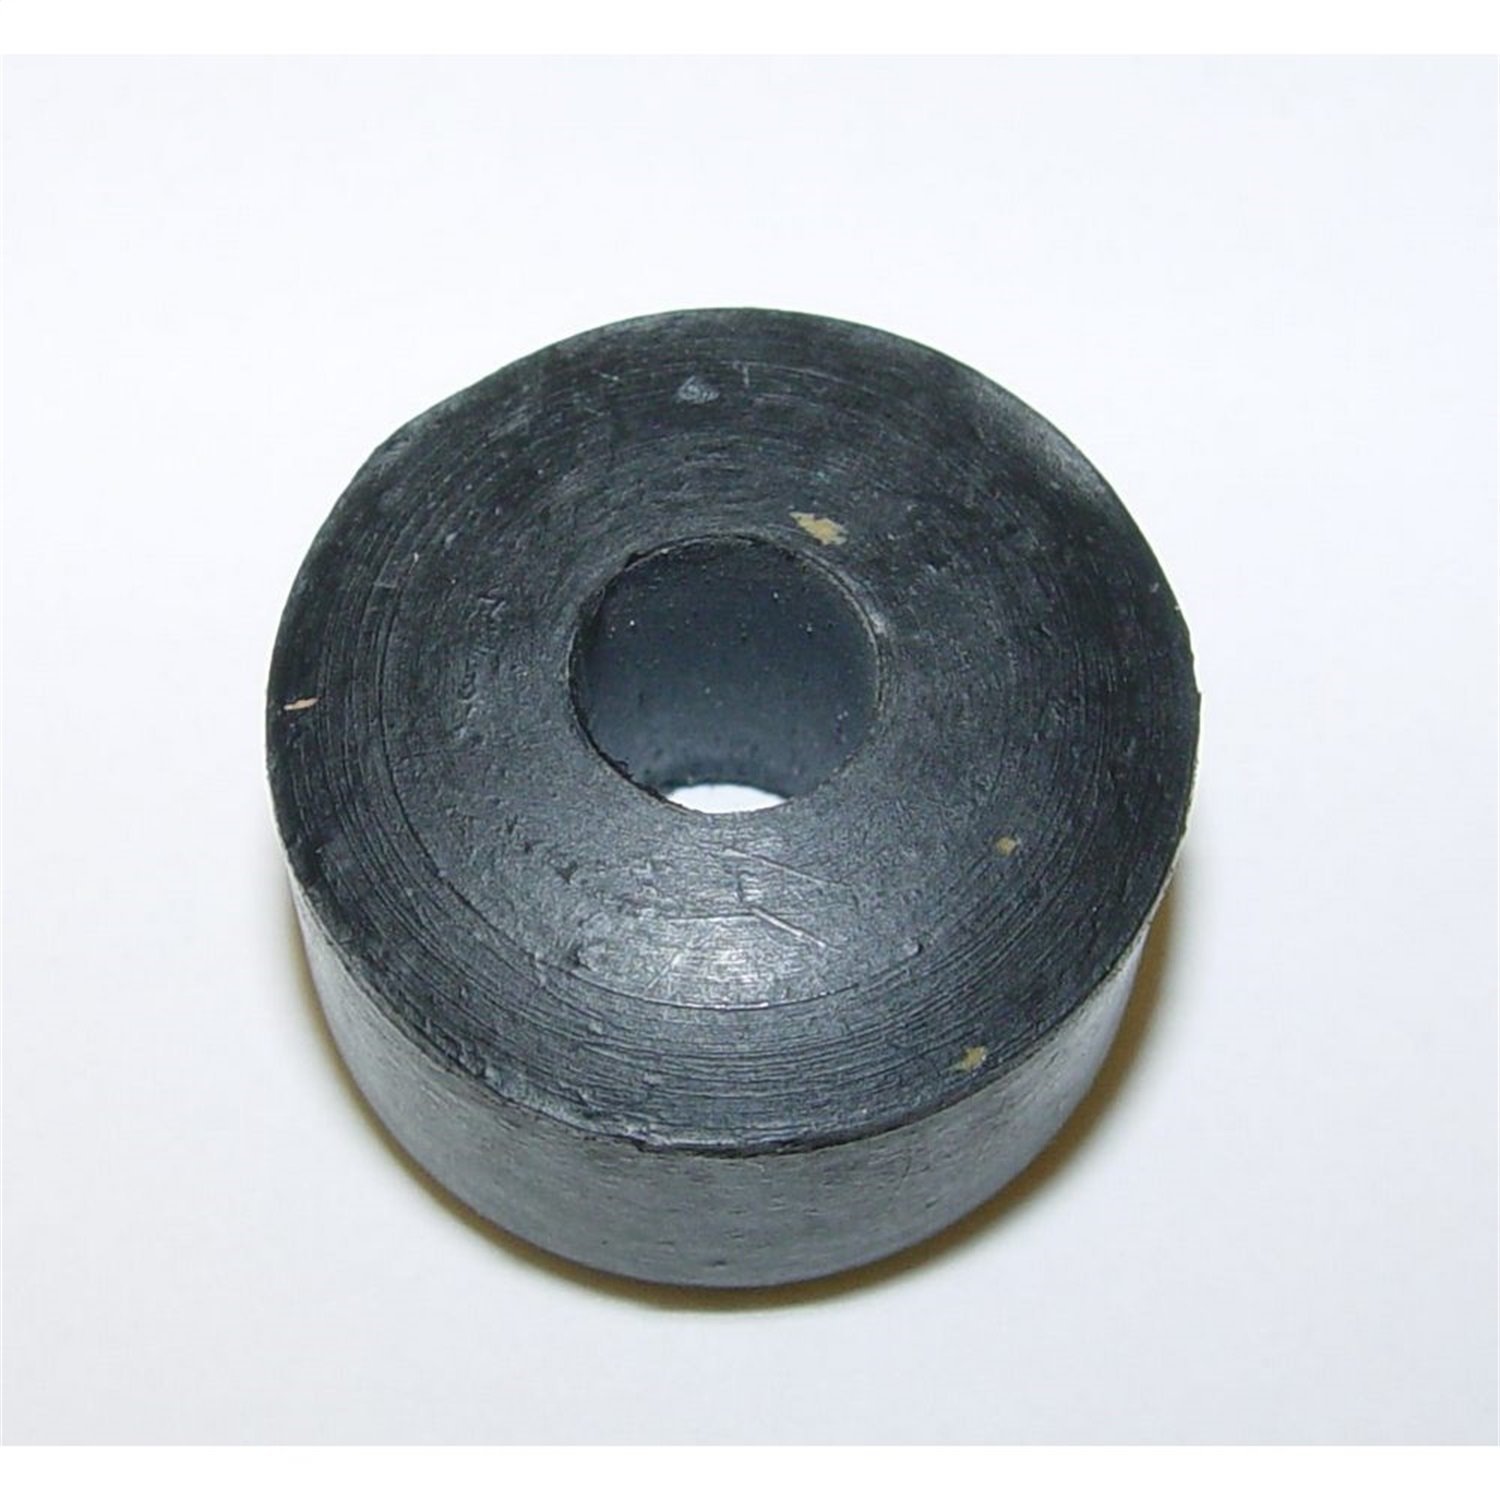 This factory-style shock mount bushing from Omix-ADA fits